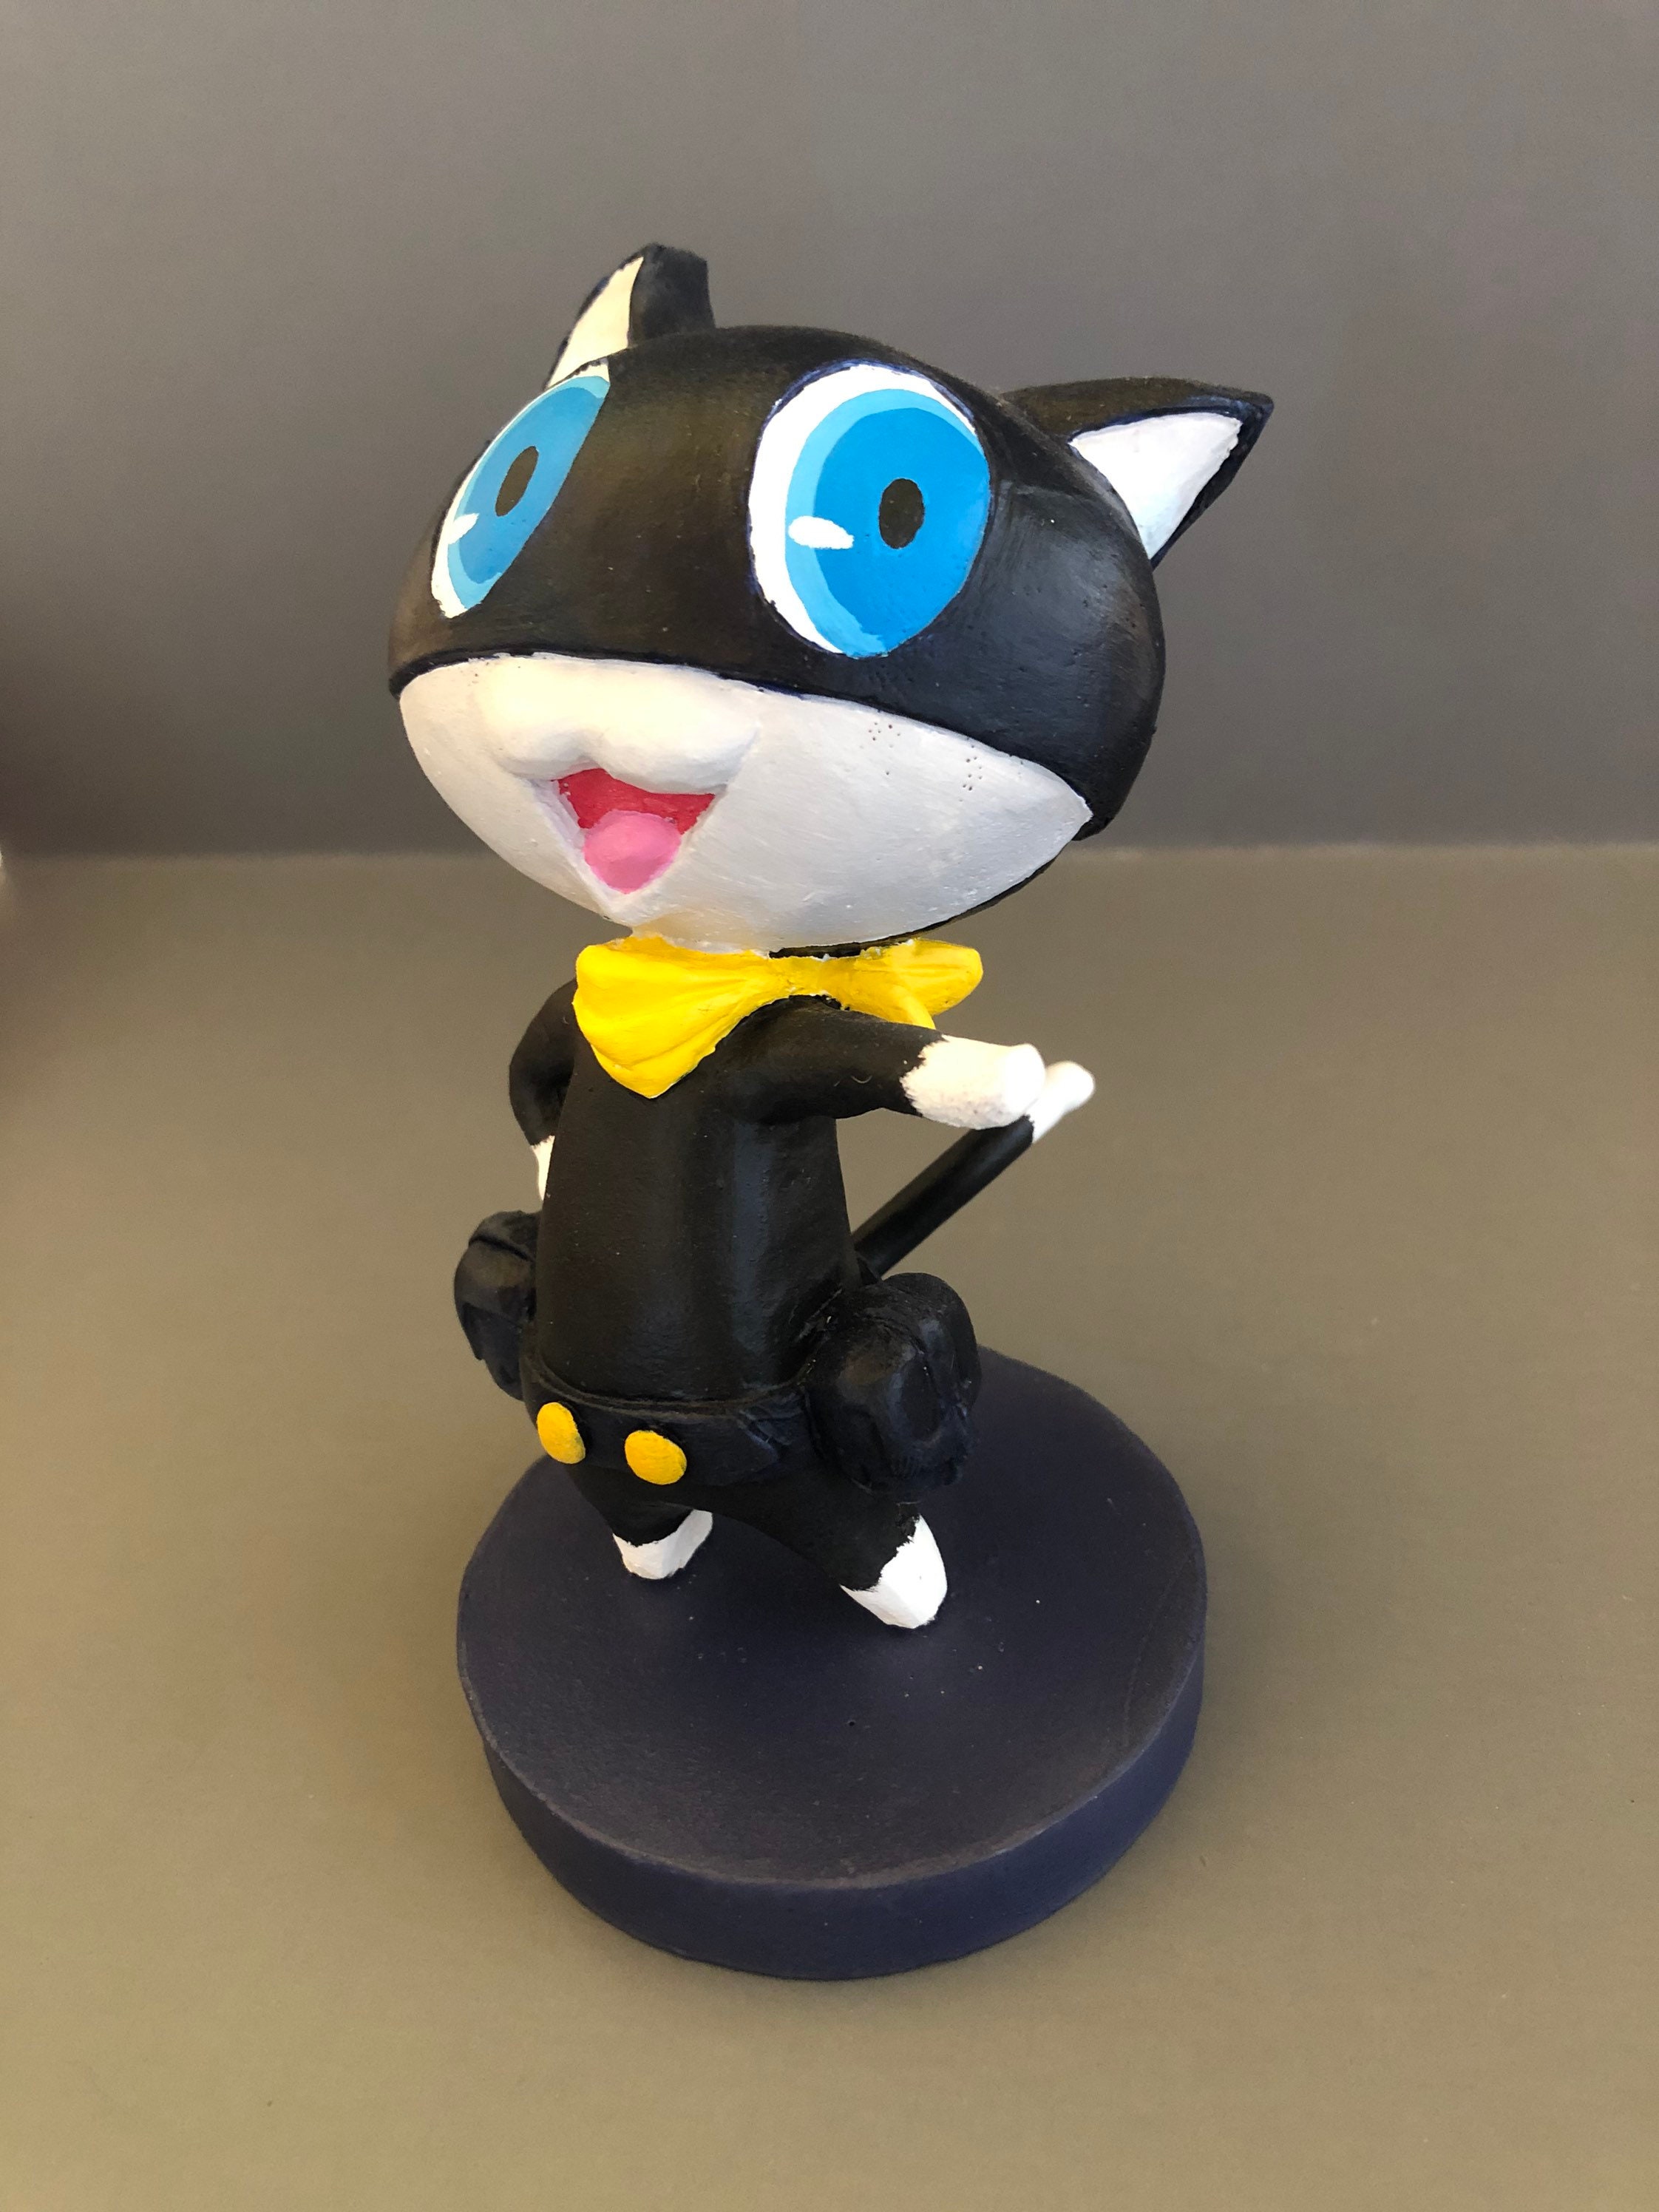 halvkugle Besiddelse Åben Morgana Fanmade Figure Inspired by the Persona Series - Etsy